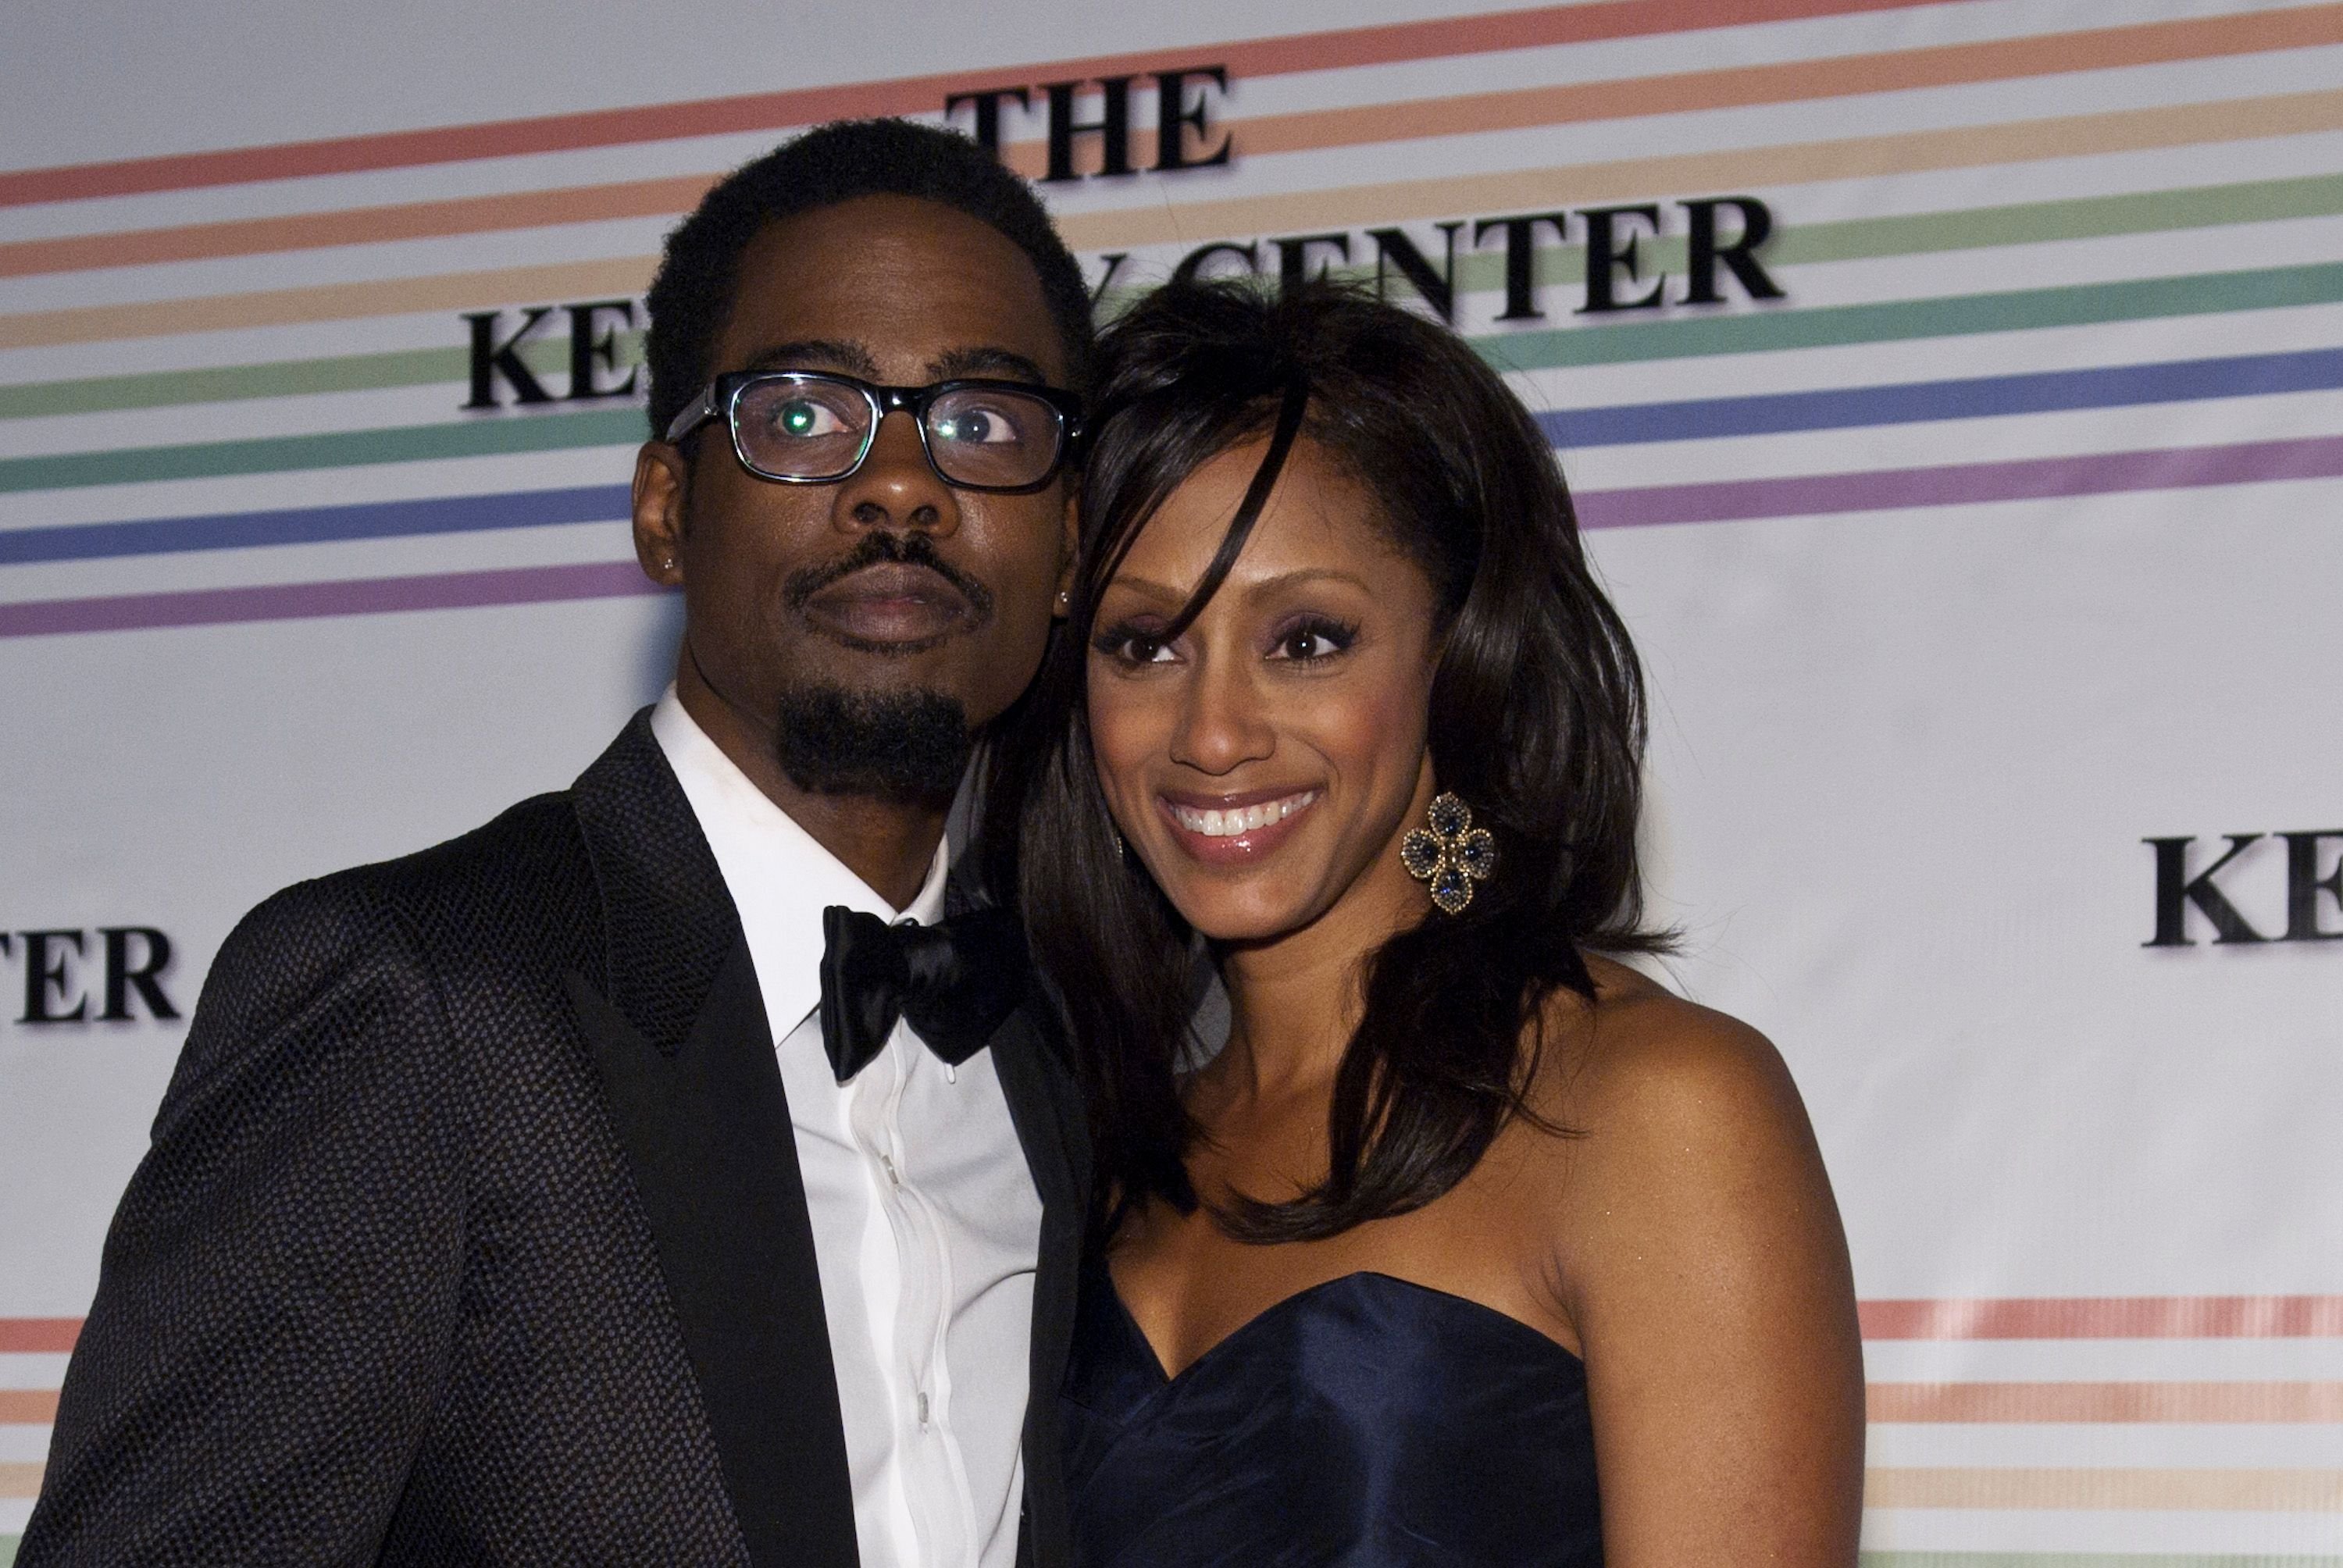 Chris Rock and Malaak Rock attend the 33rd Annual Kennedy Center Honors at the Kennedy Center Hall of States on December 5, 2010 in Washington, DC. | Source: Getty Images